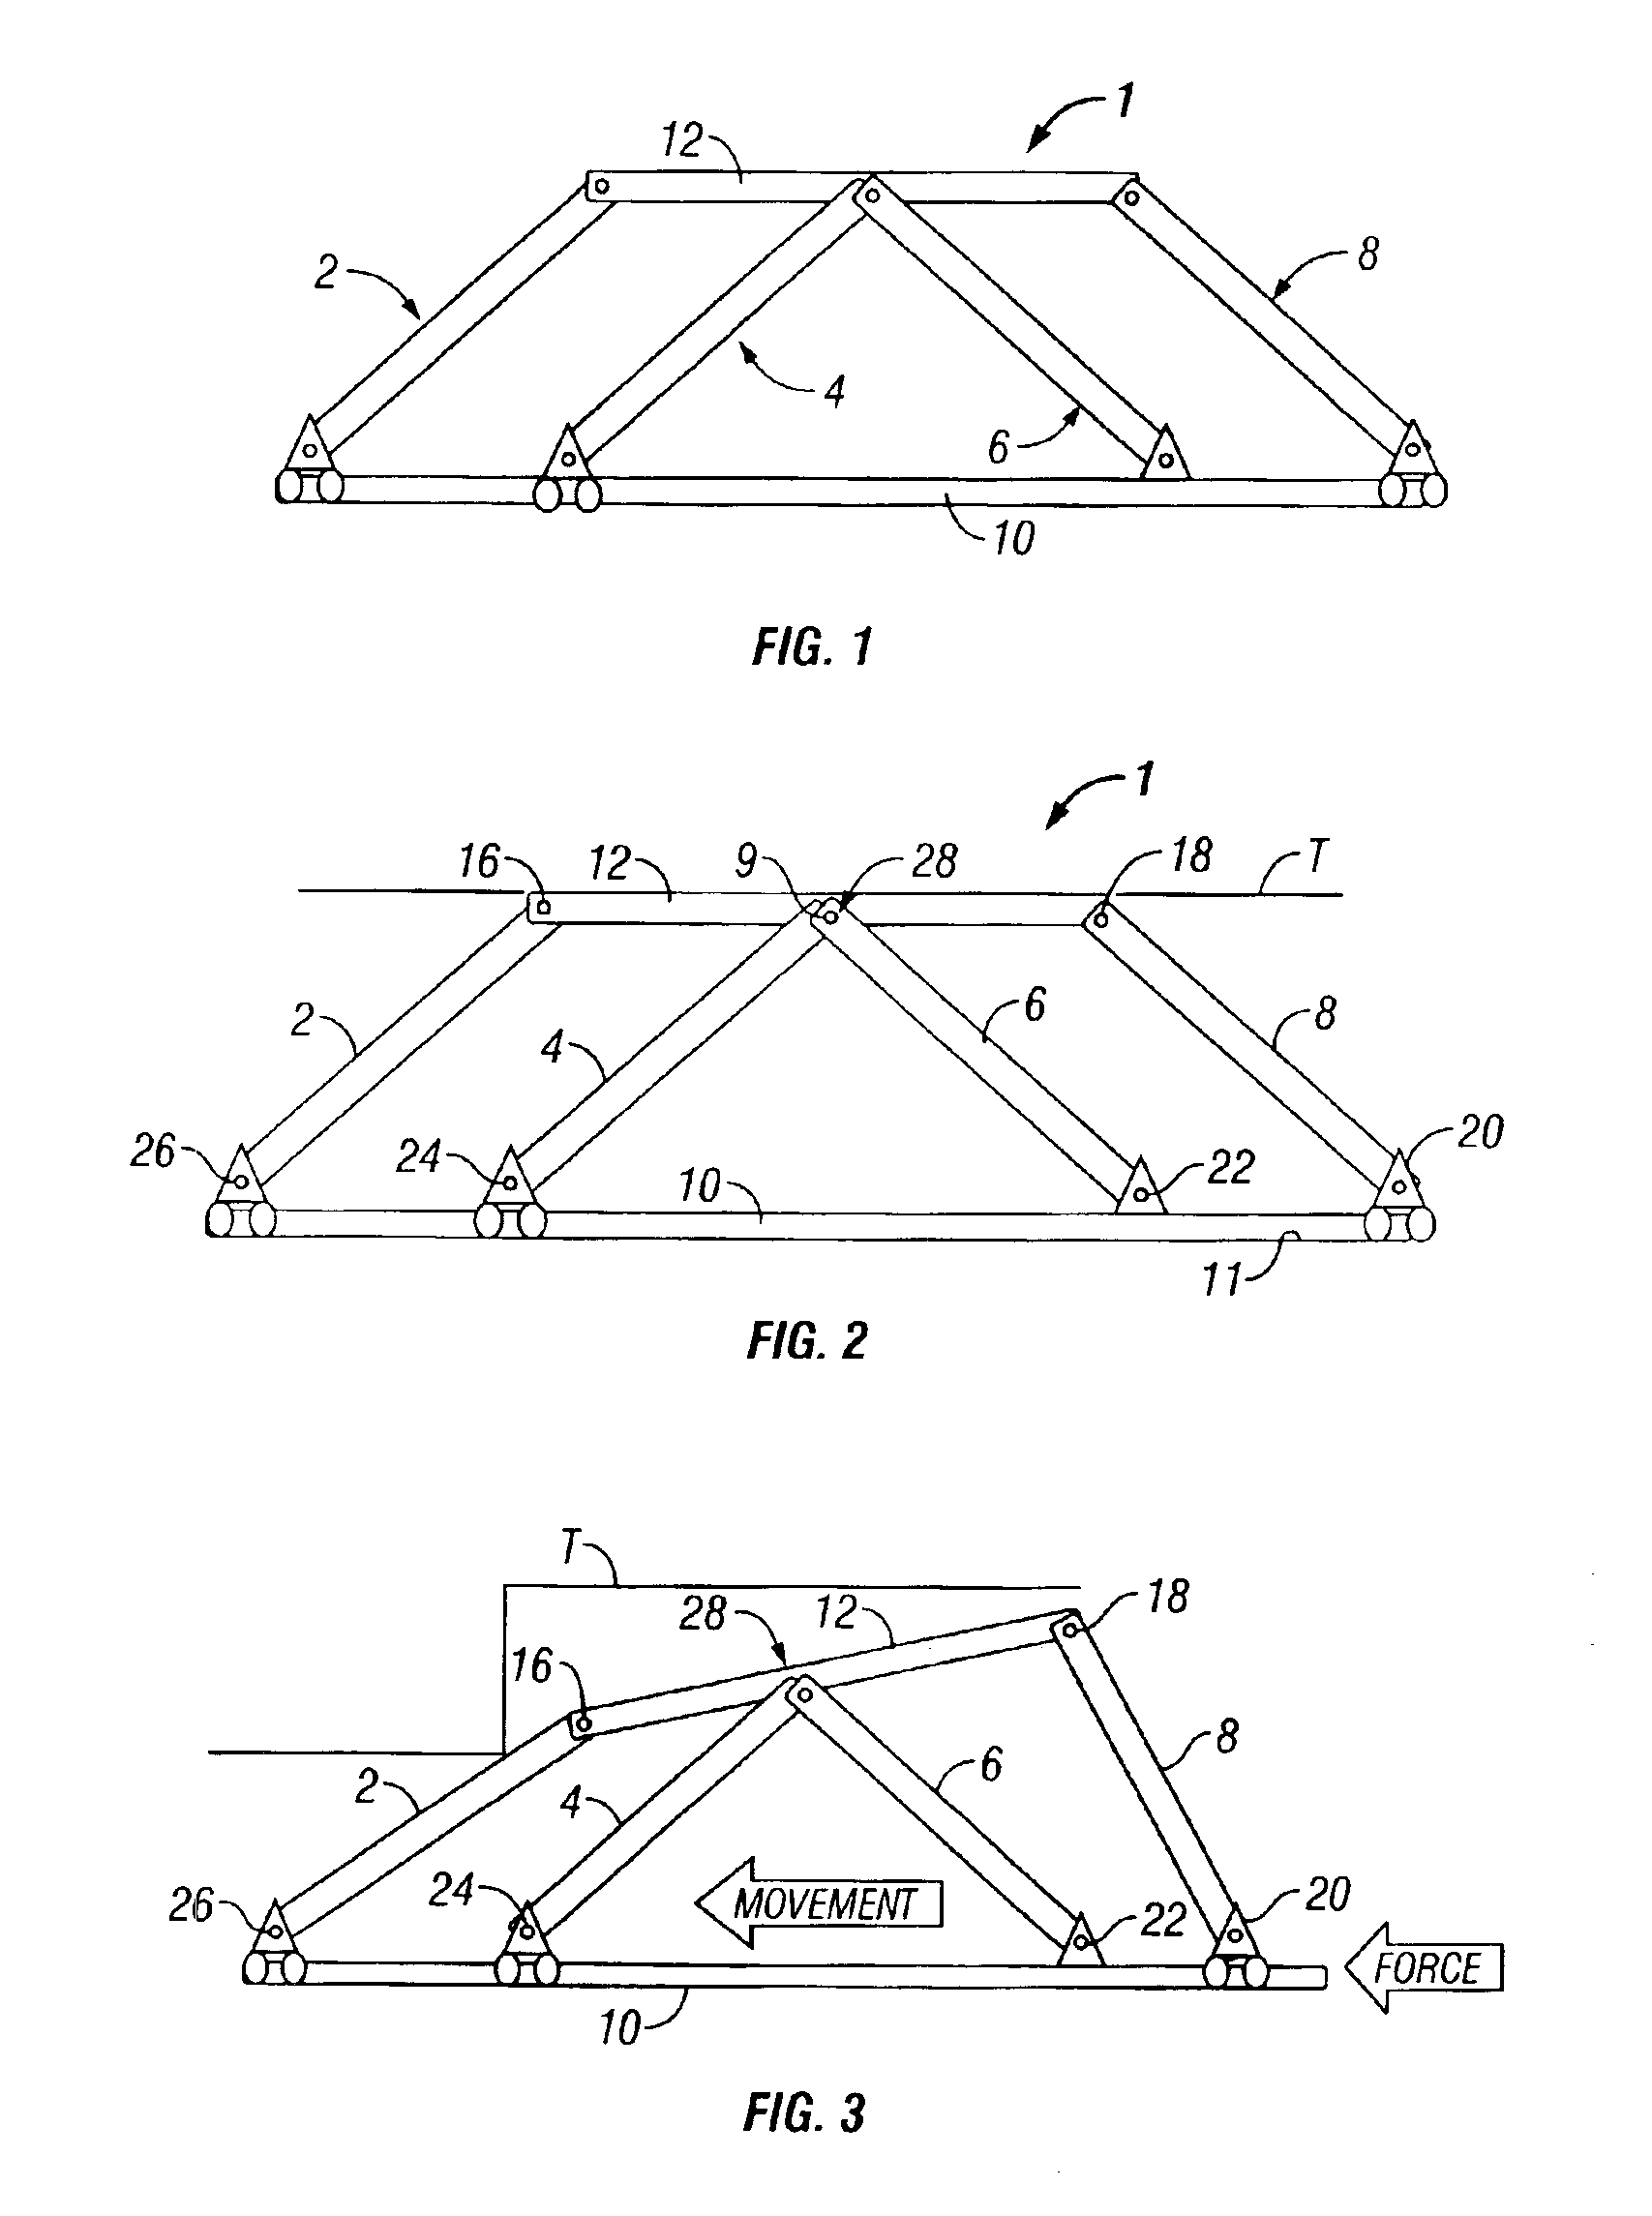 Mechanism that assists tractoring on uniform and non-uniform surfaces